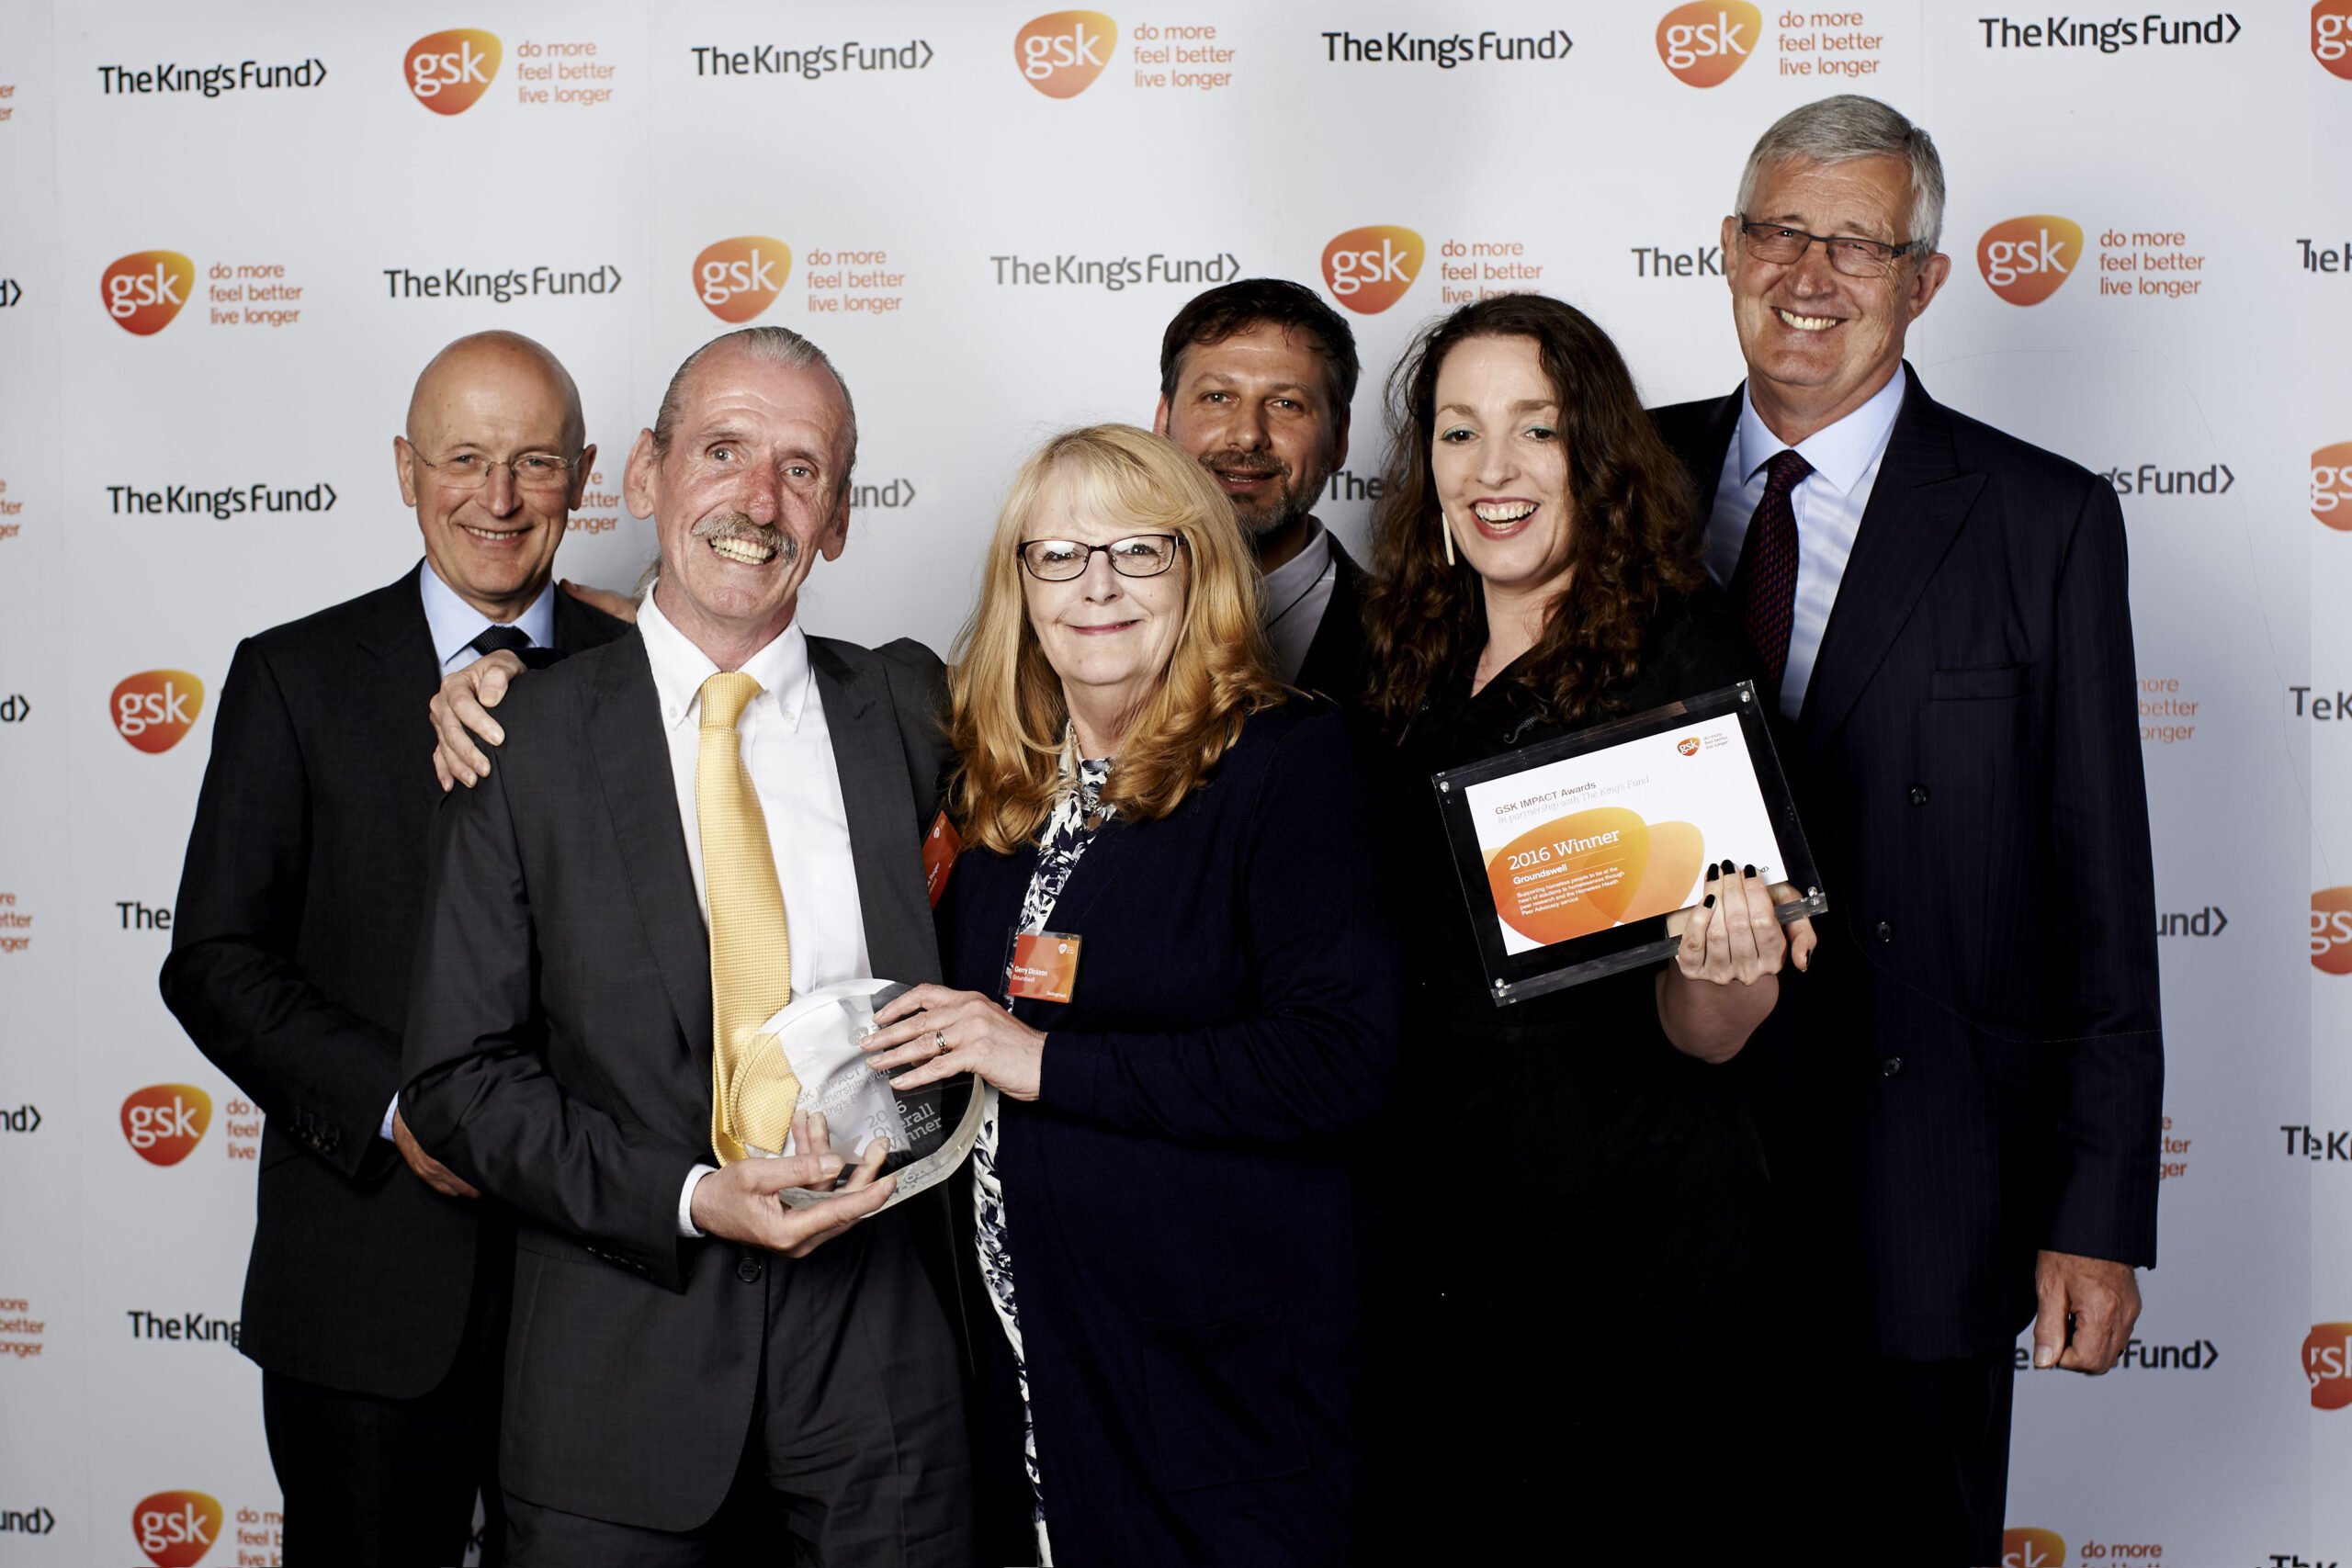 An image of Groundswell staff and volunteers winning the GSK impact award